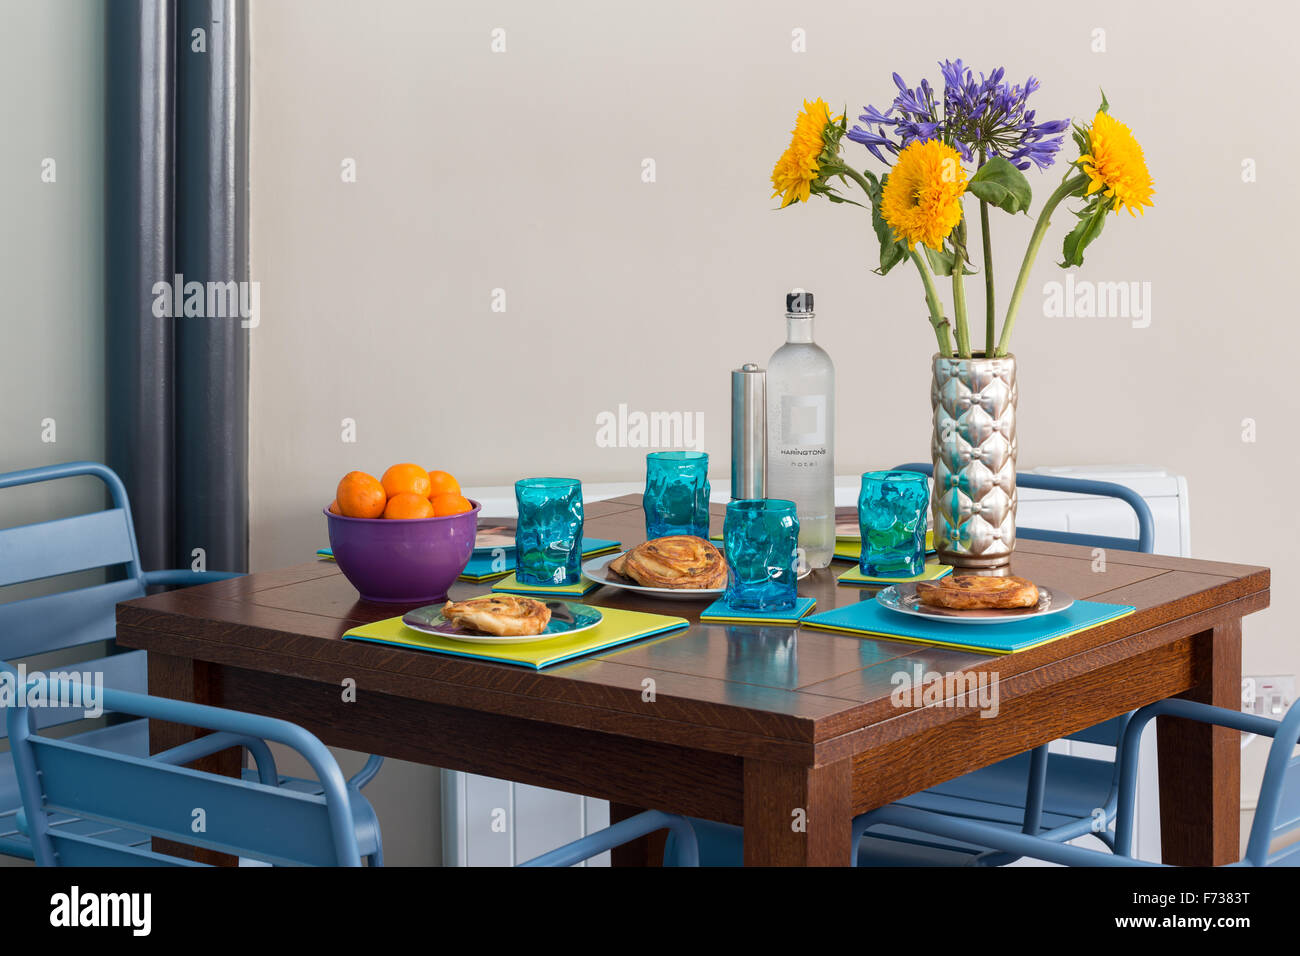 Brightly coloured contemporary dining area with table set for light continental breakfast Stock Photo